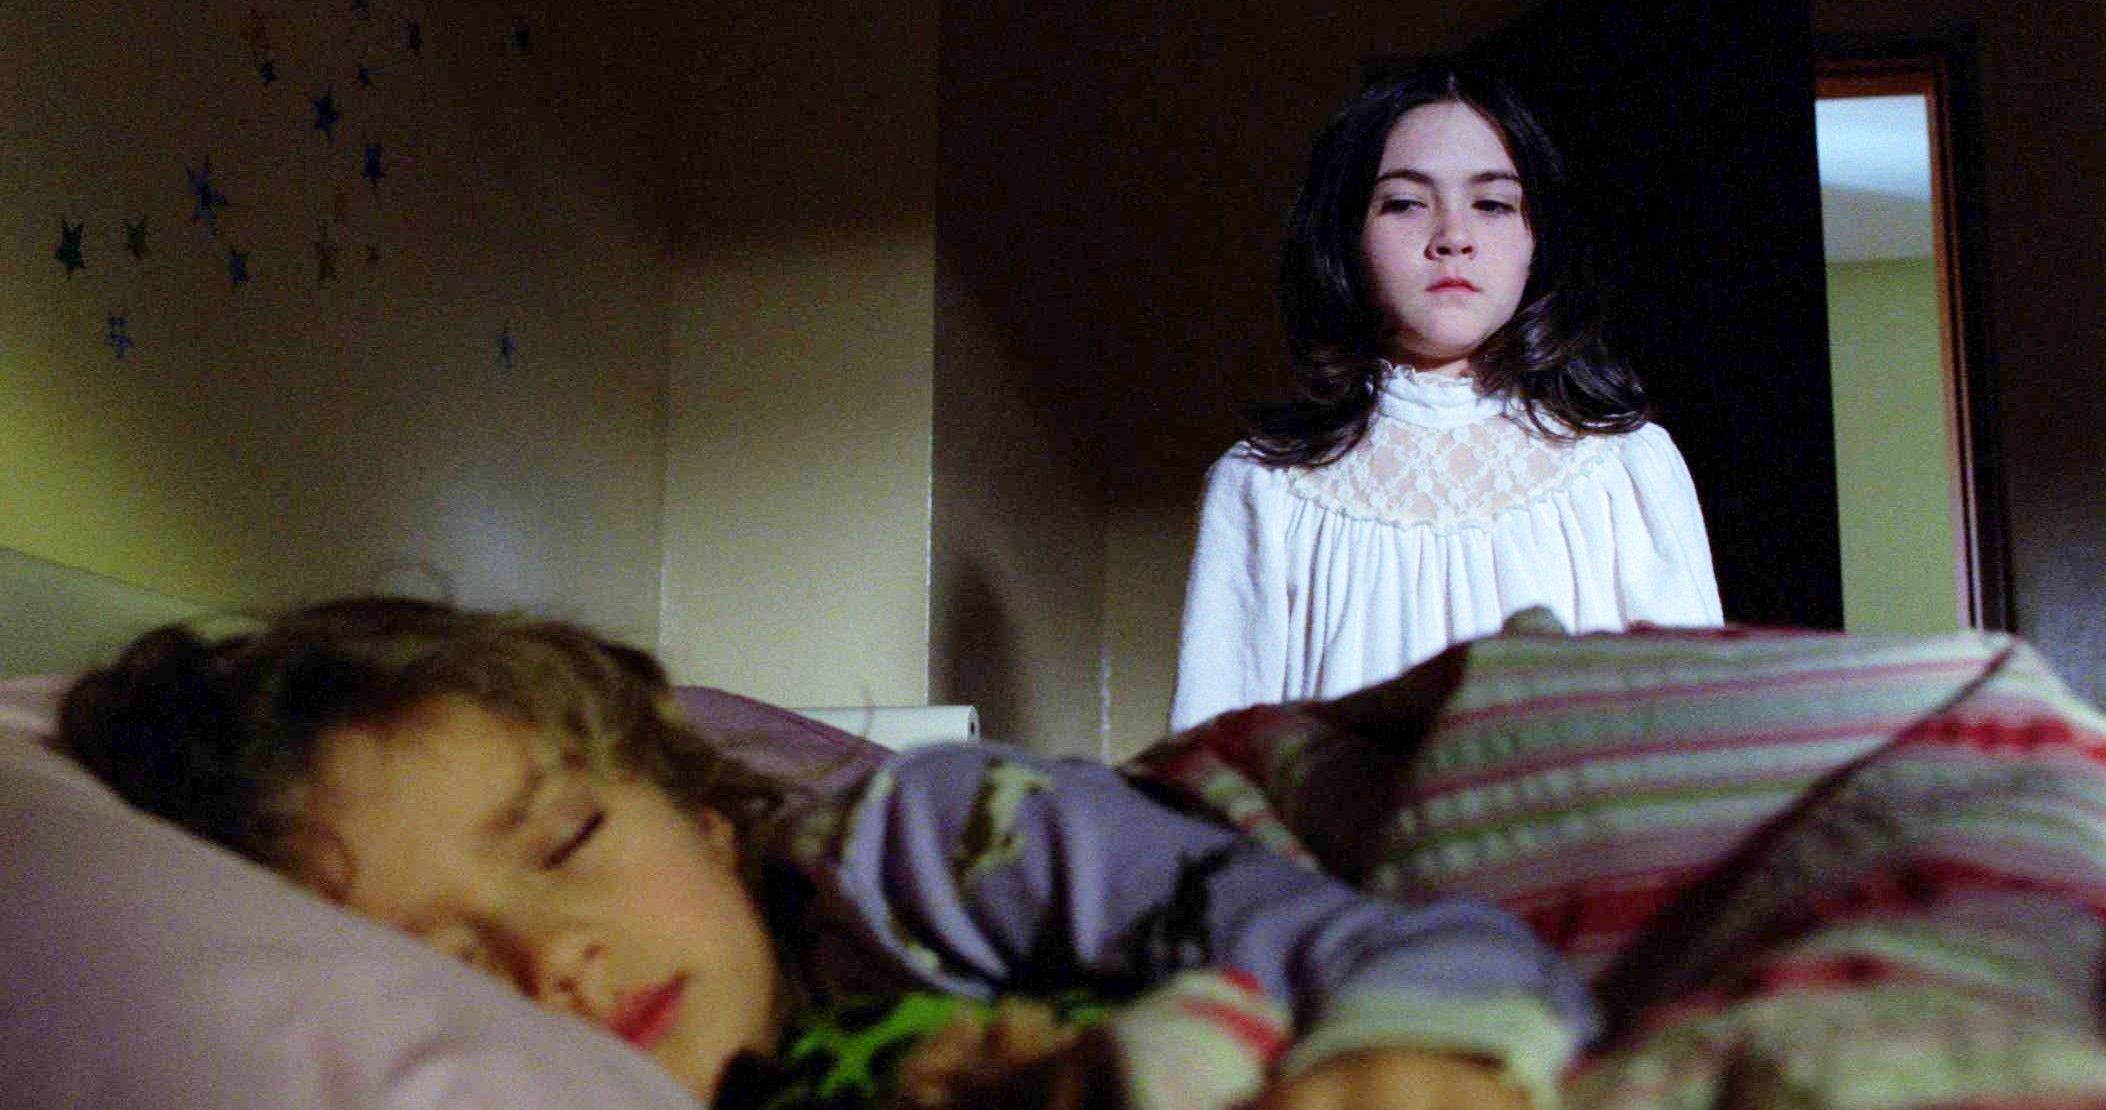 Isabelle Fuhrman in Orphan